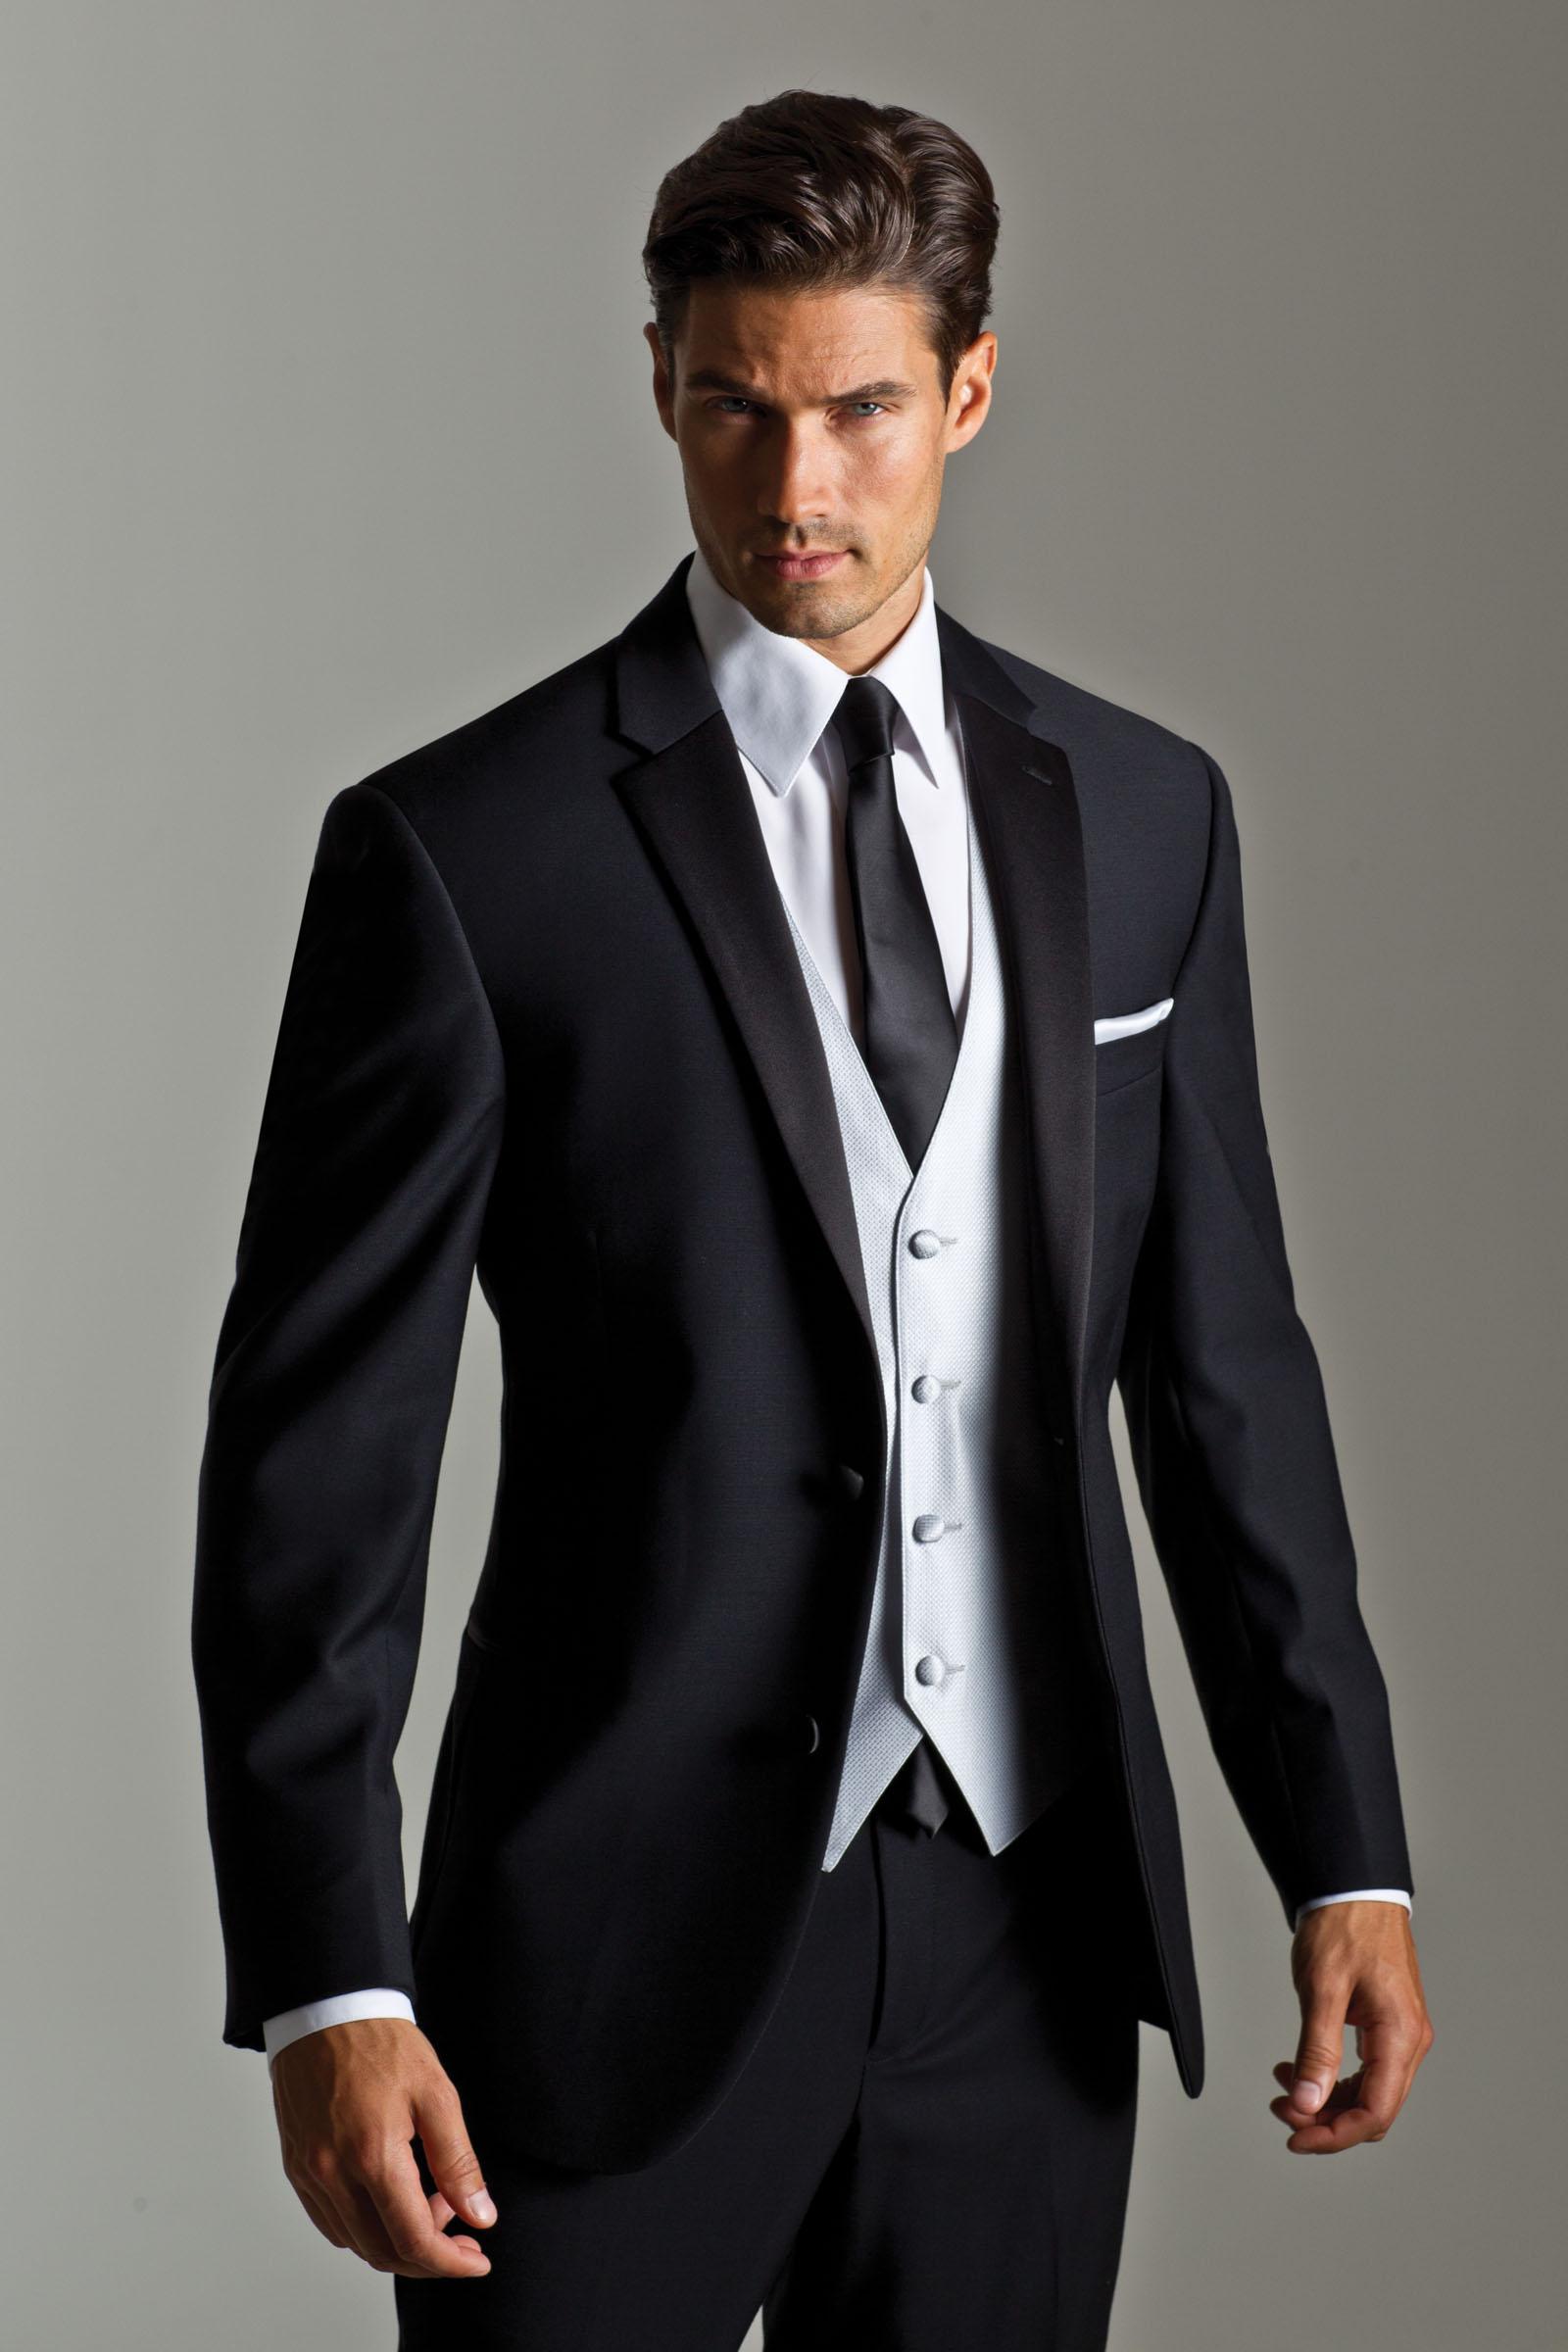 Suit for Men Styles Some of The Best